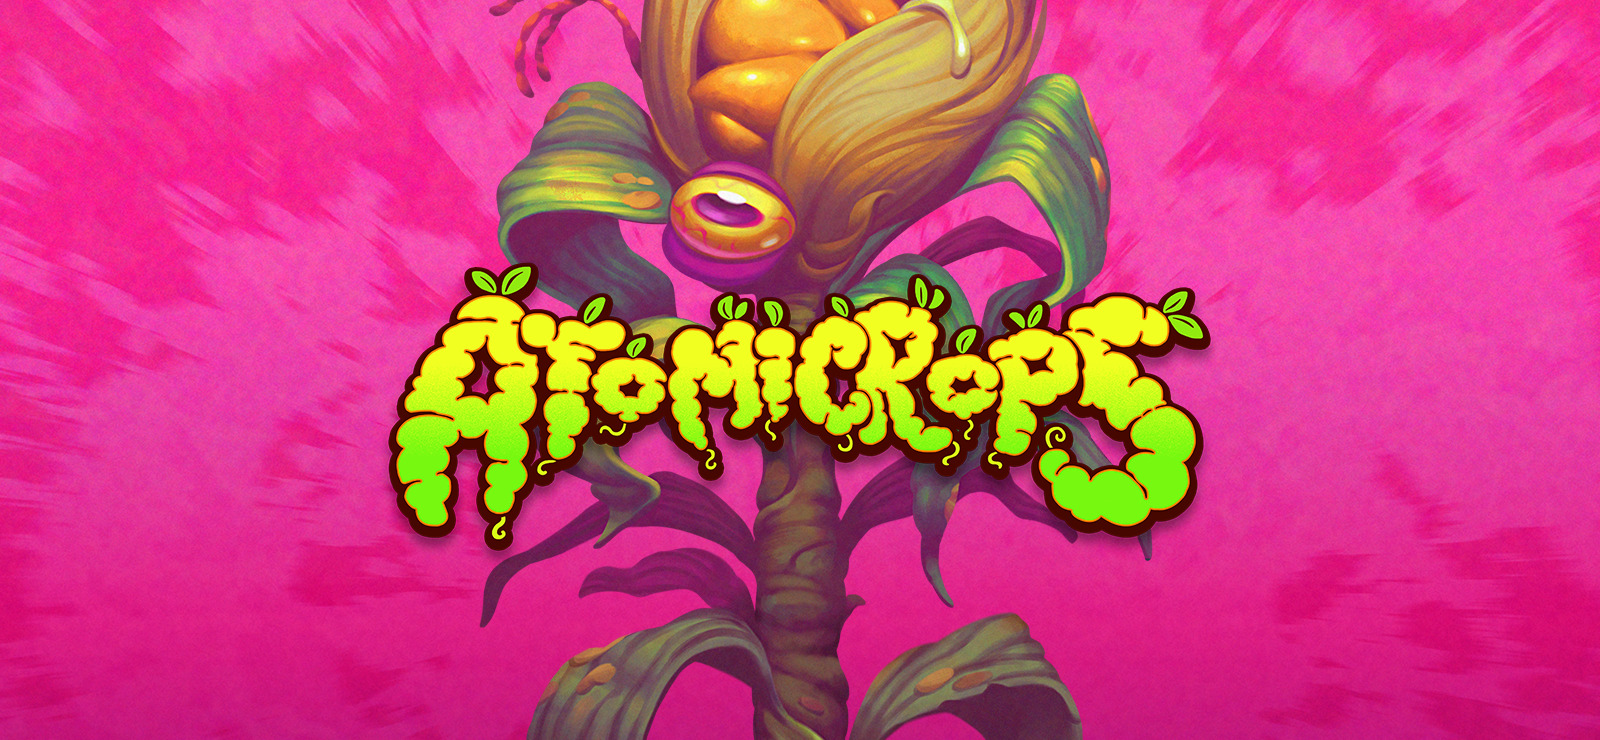 Atomicrops free download